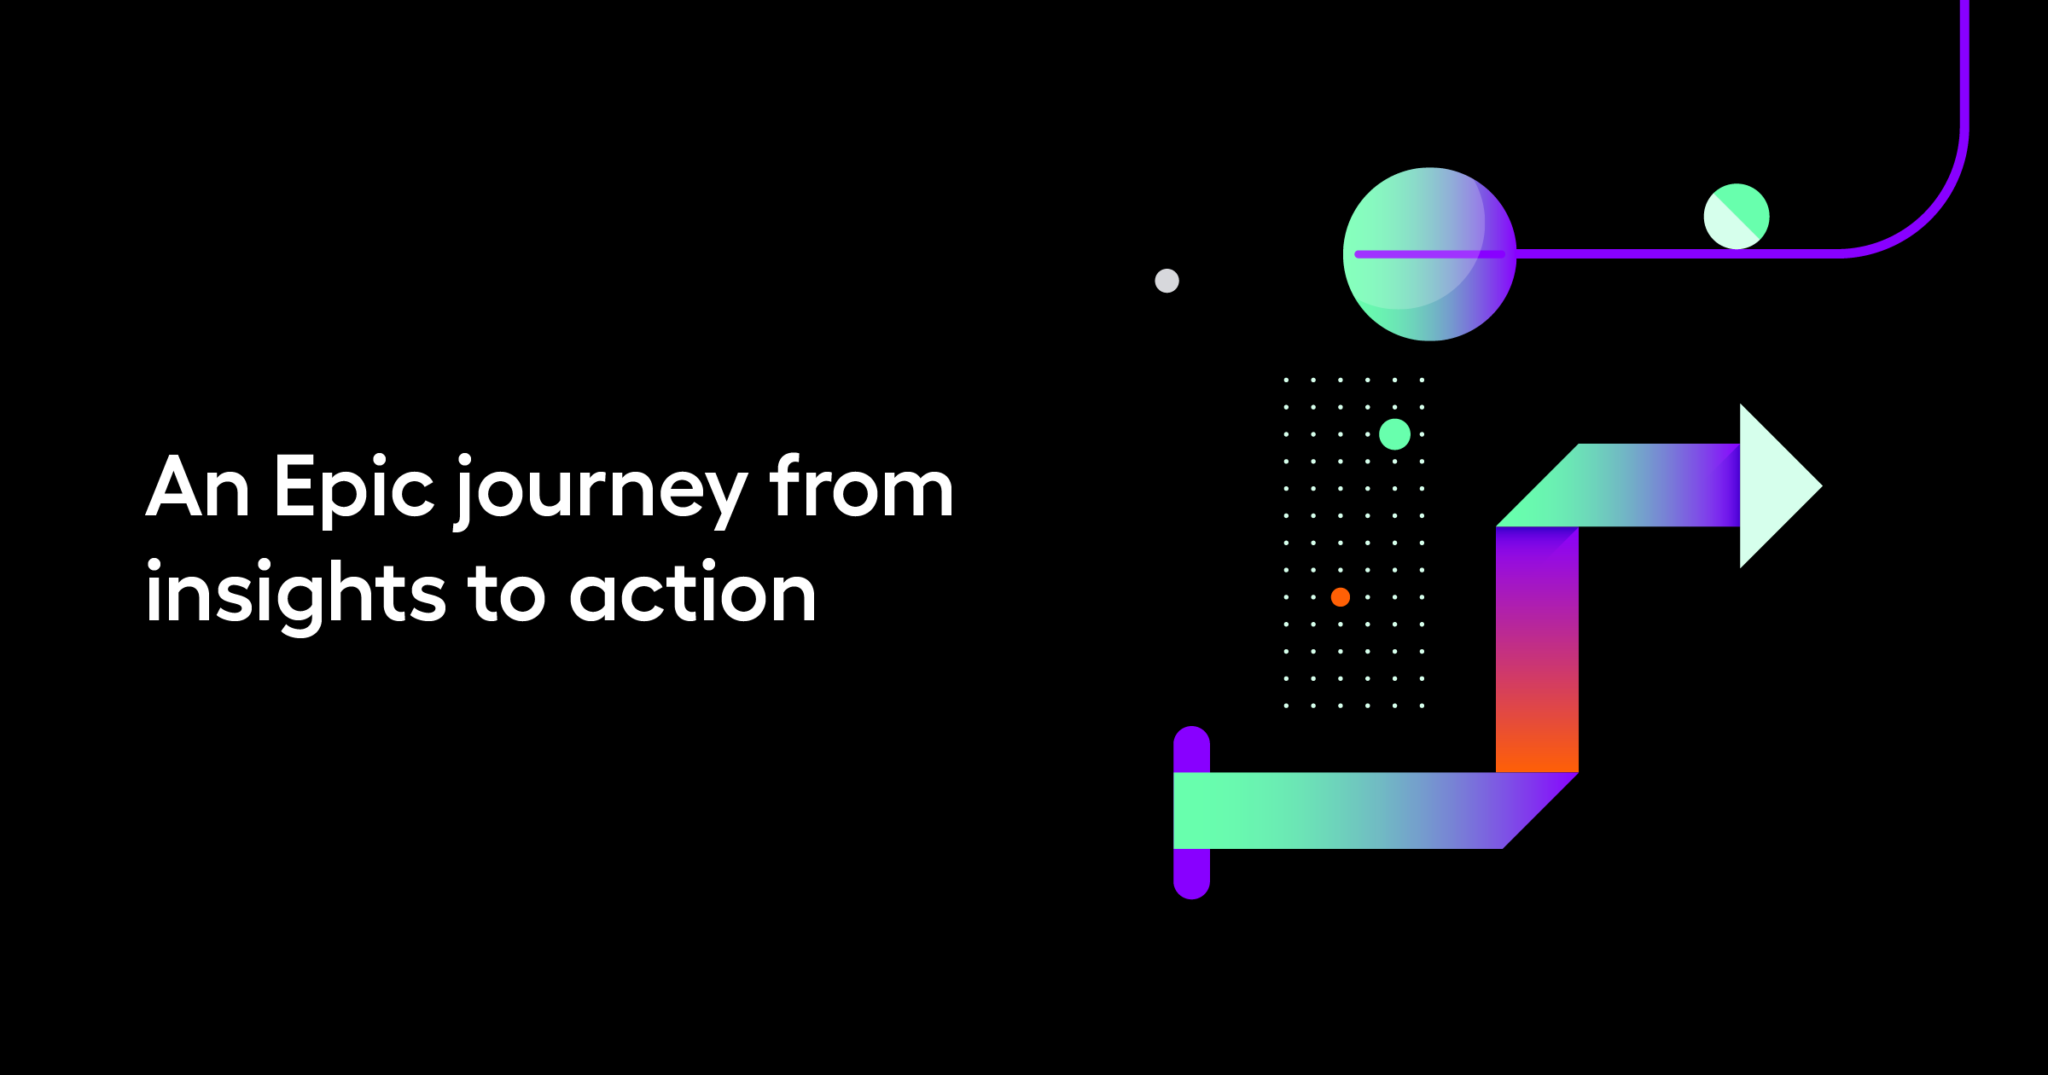 An Epic journey from insights to action